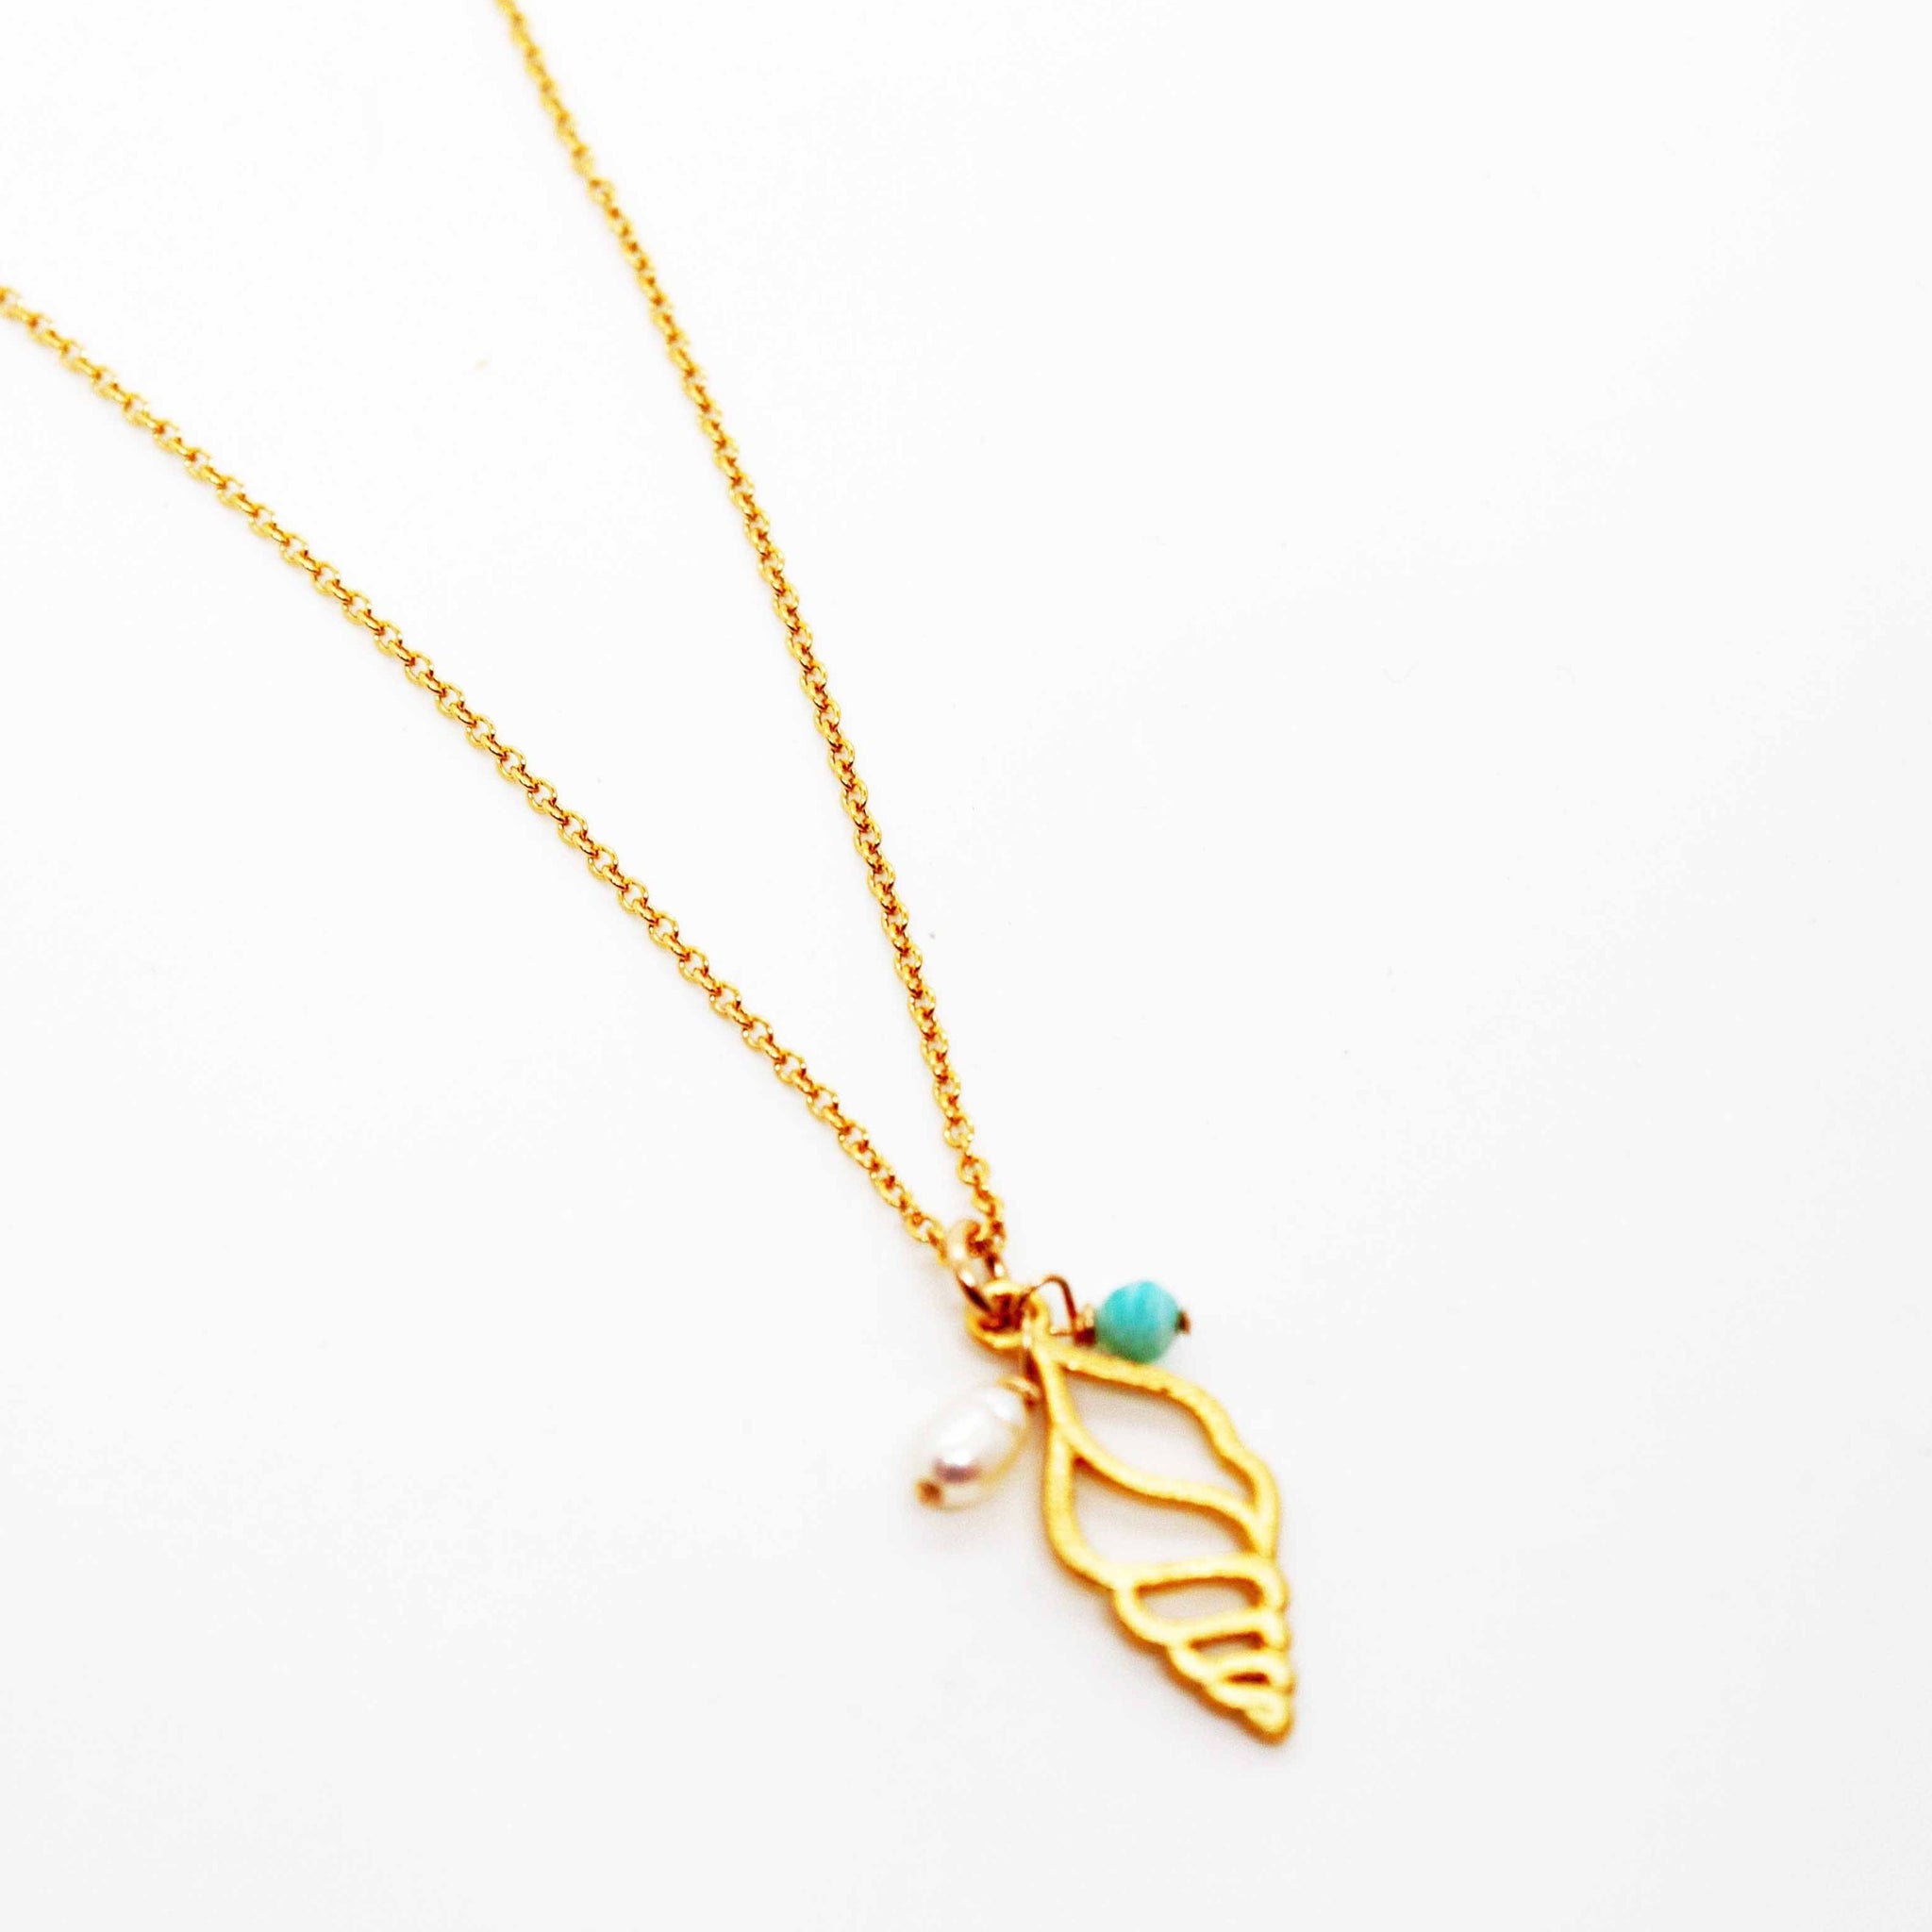 Gold filled* chain with larimar & pearl beads on a gold vermeil* conch pendant handmade in Toronto by kp jewelry co.